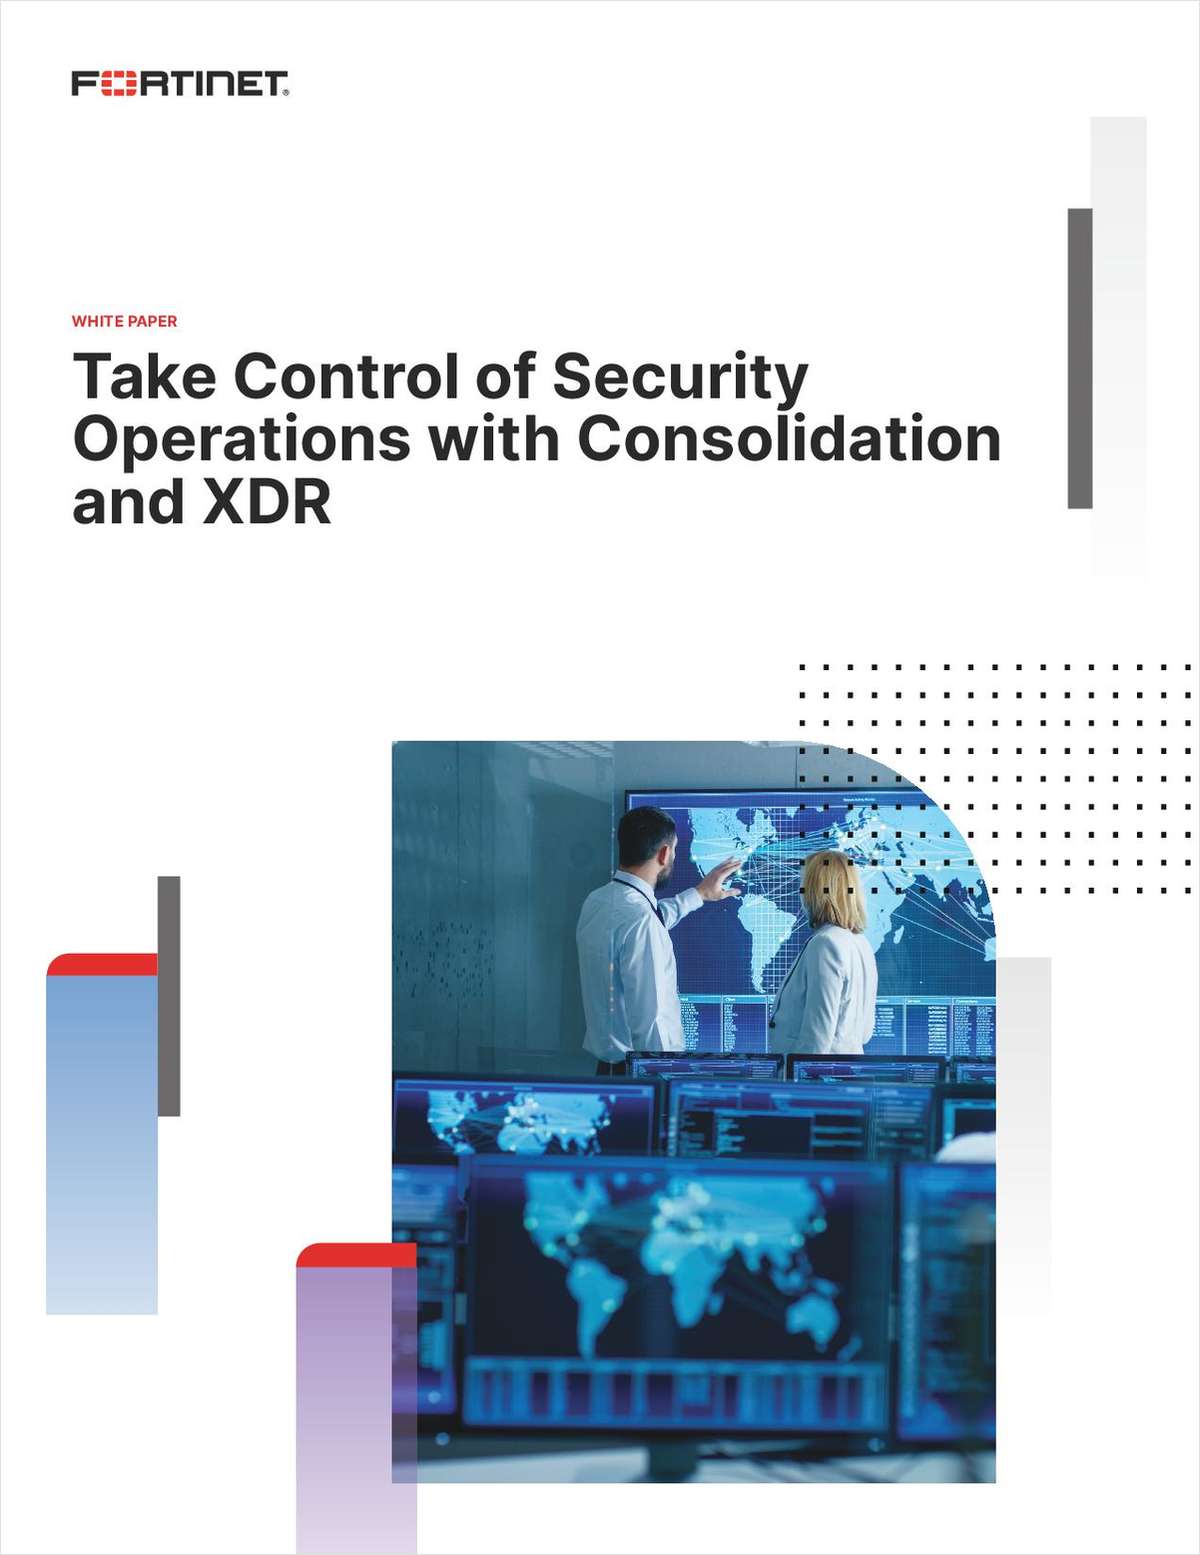 Take Control of Security Operations with Consolidation and XDR